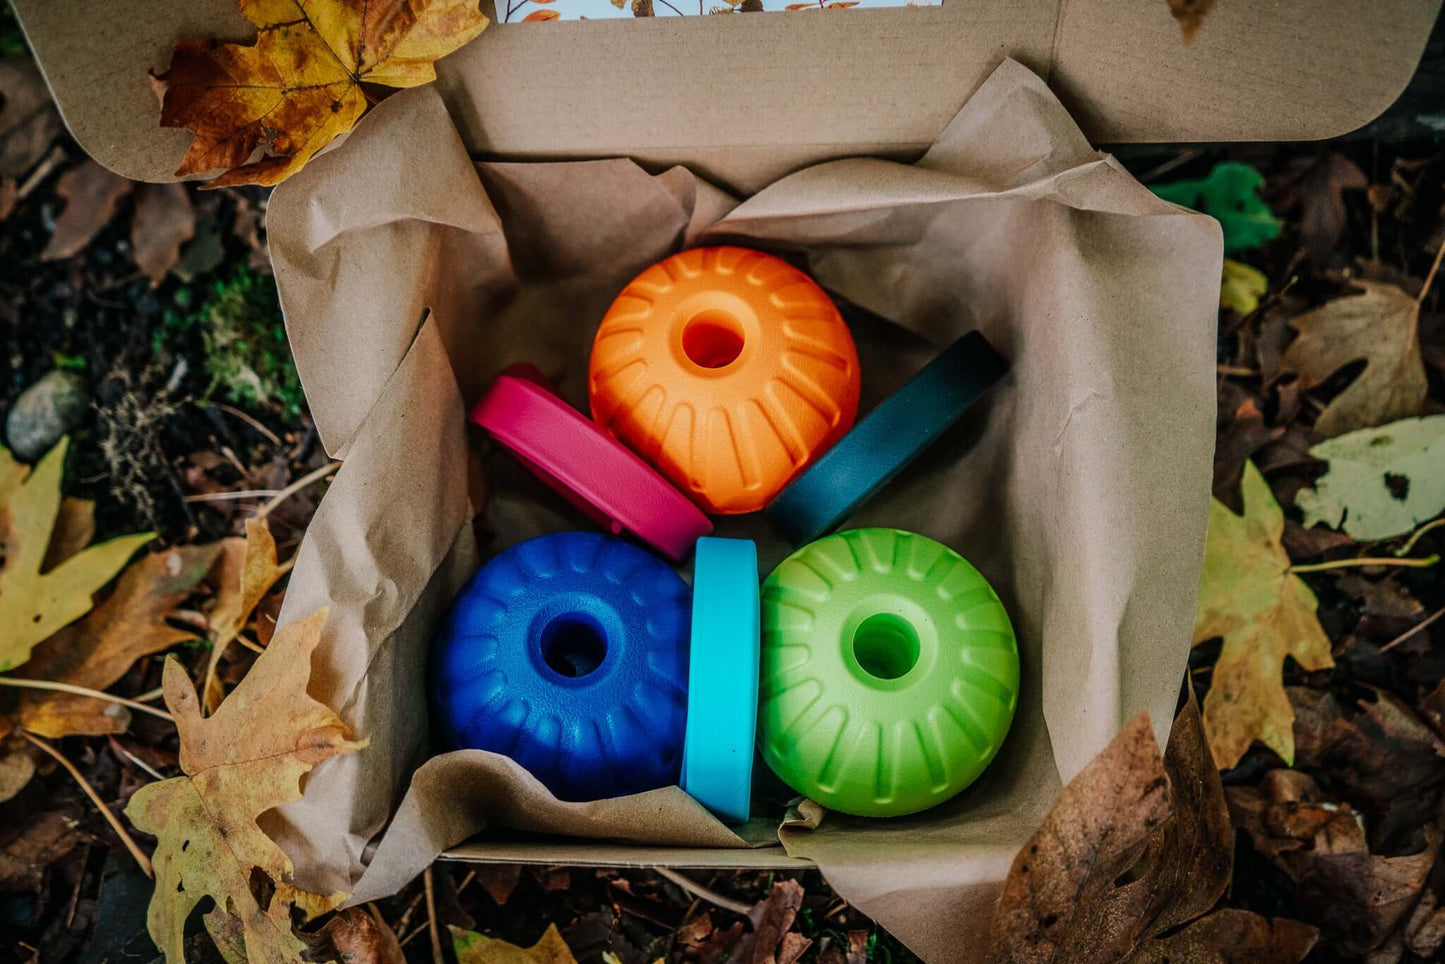 build your own tug kit cardboard box with three custom foam ball options and three custom biothane handle options with a background of a pile of leaves